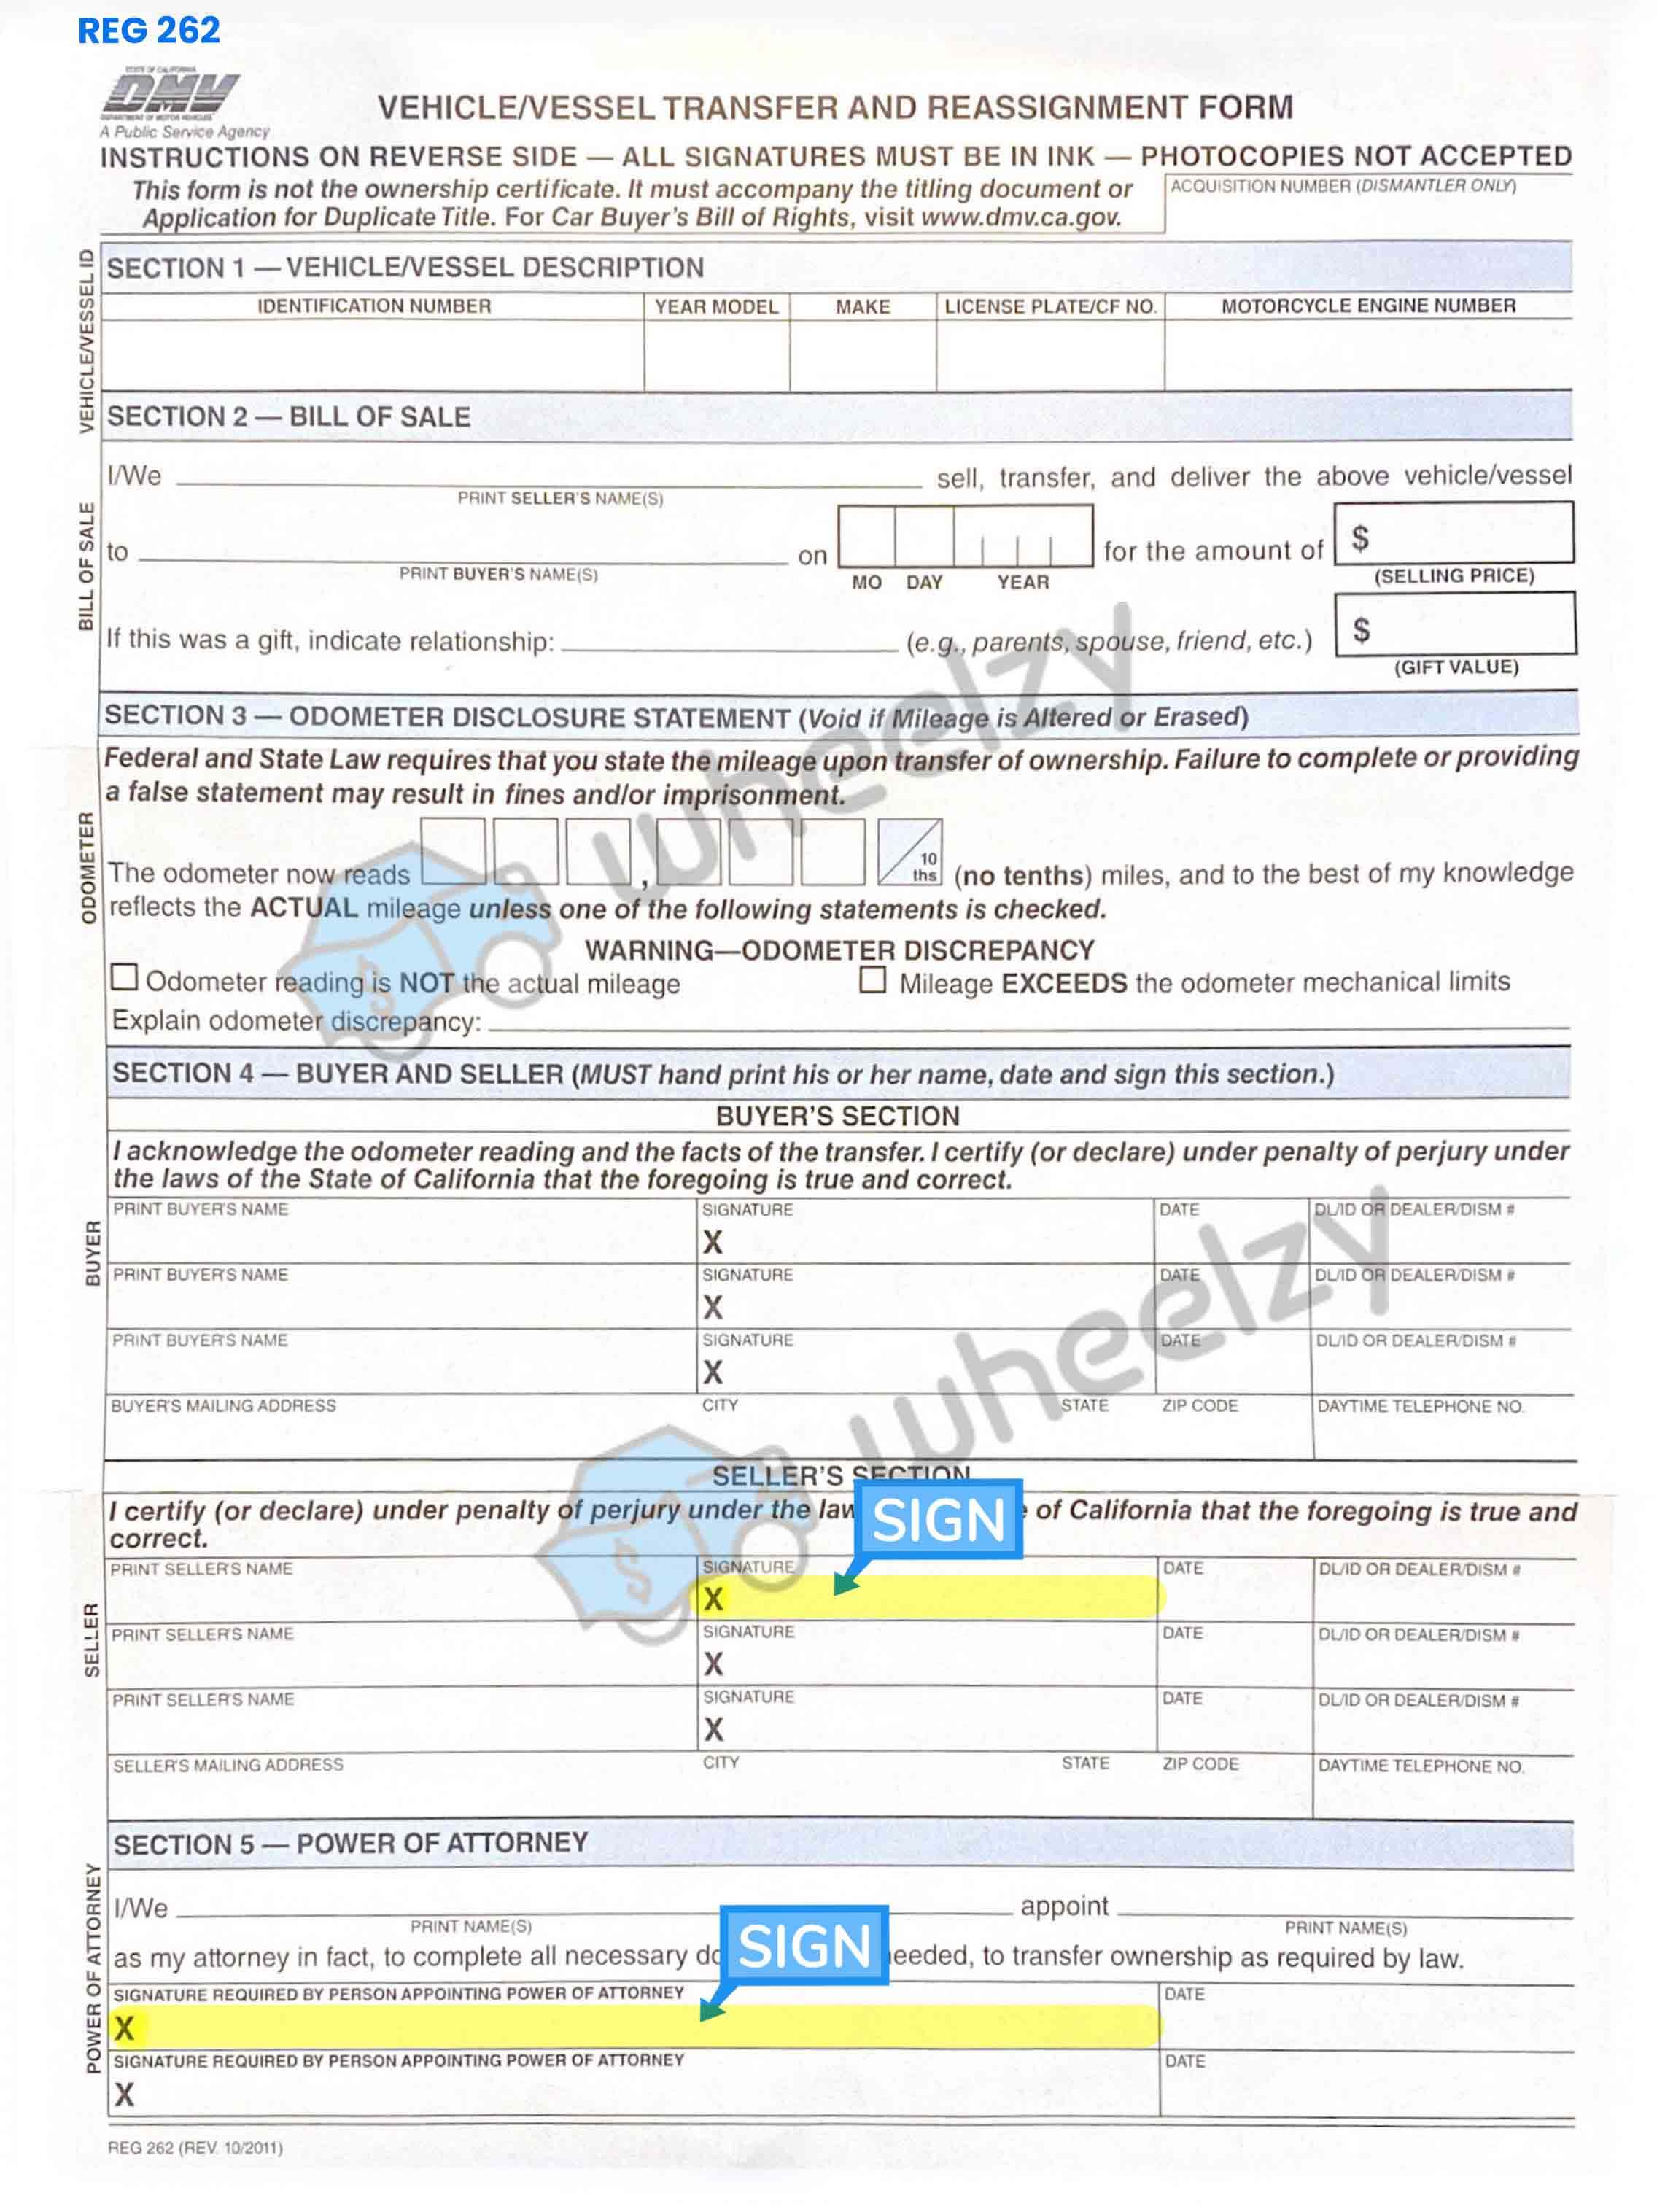 How to Sign Your REG Forms in Santa Ana